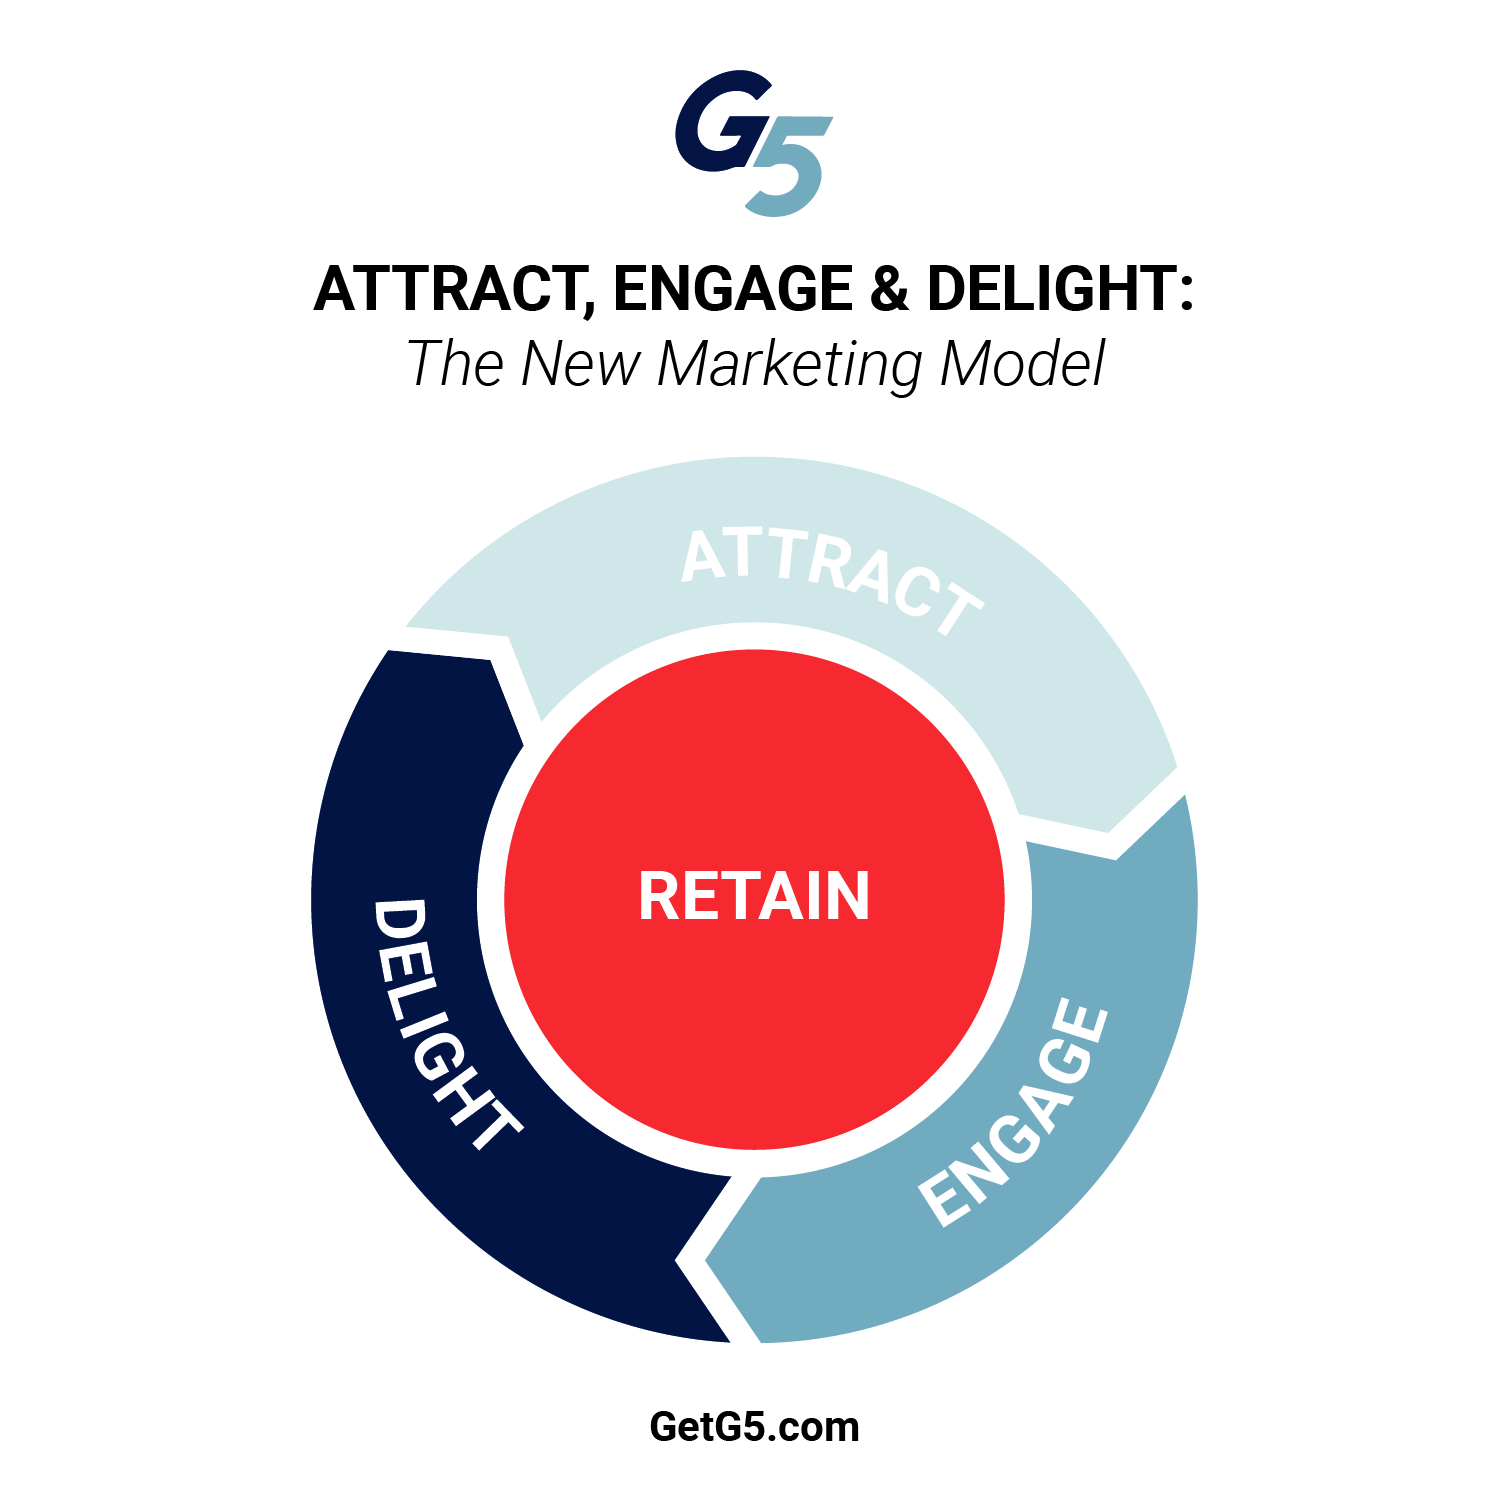 Attract, engage, and delight: the new marketing model